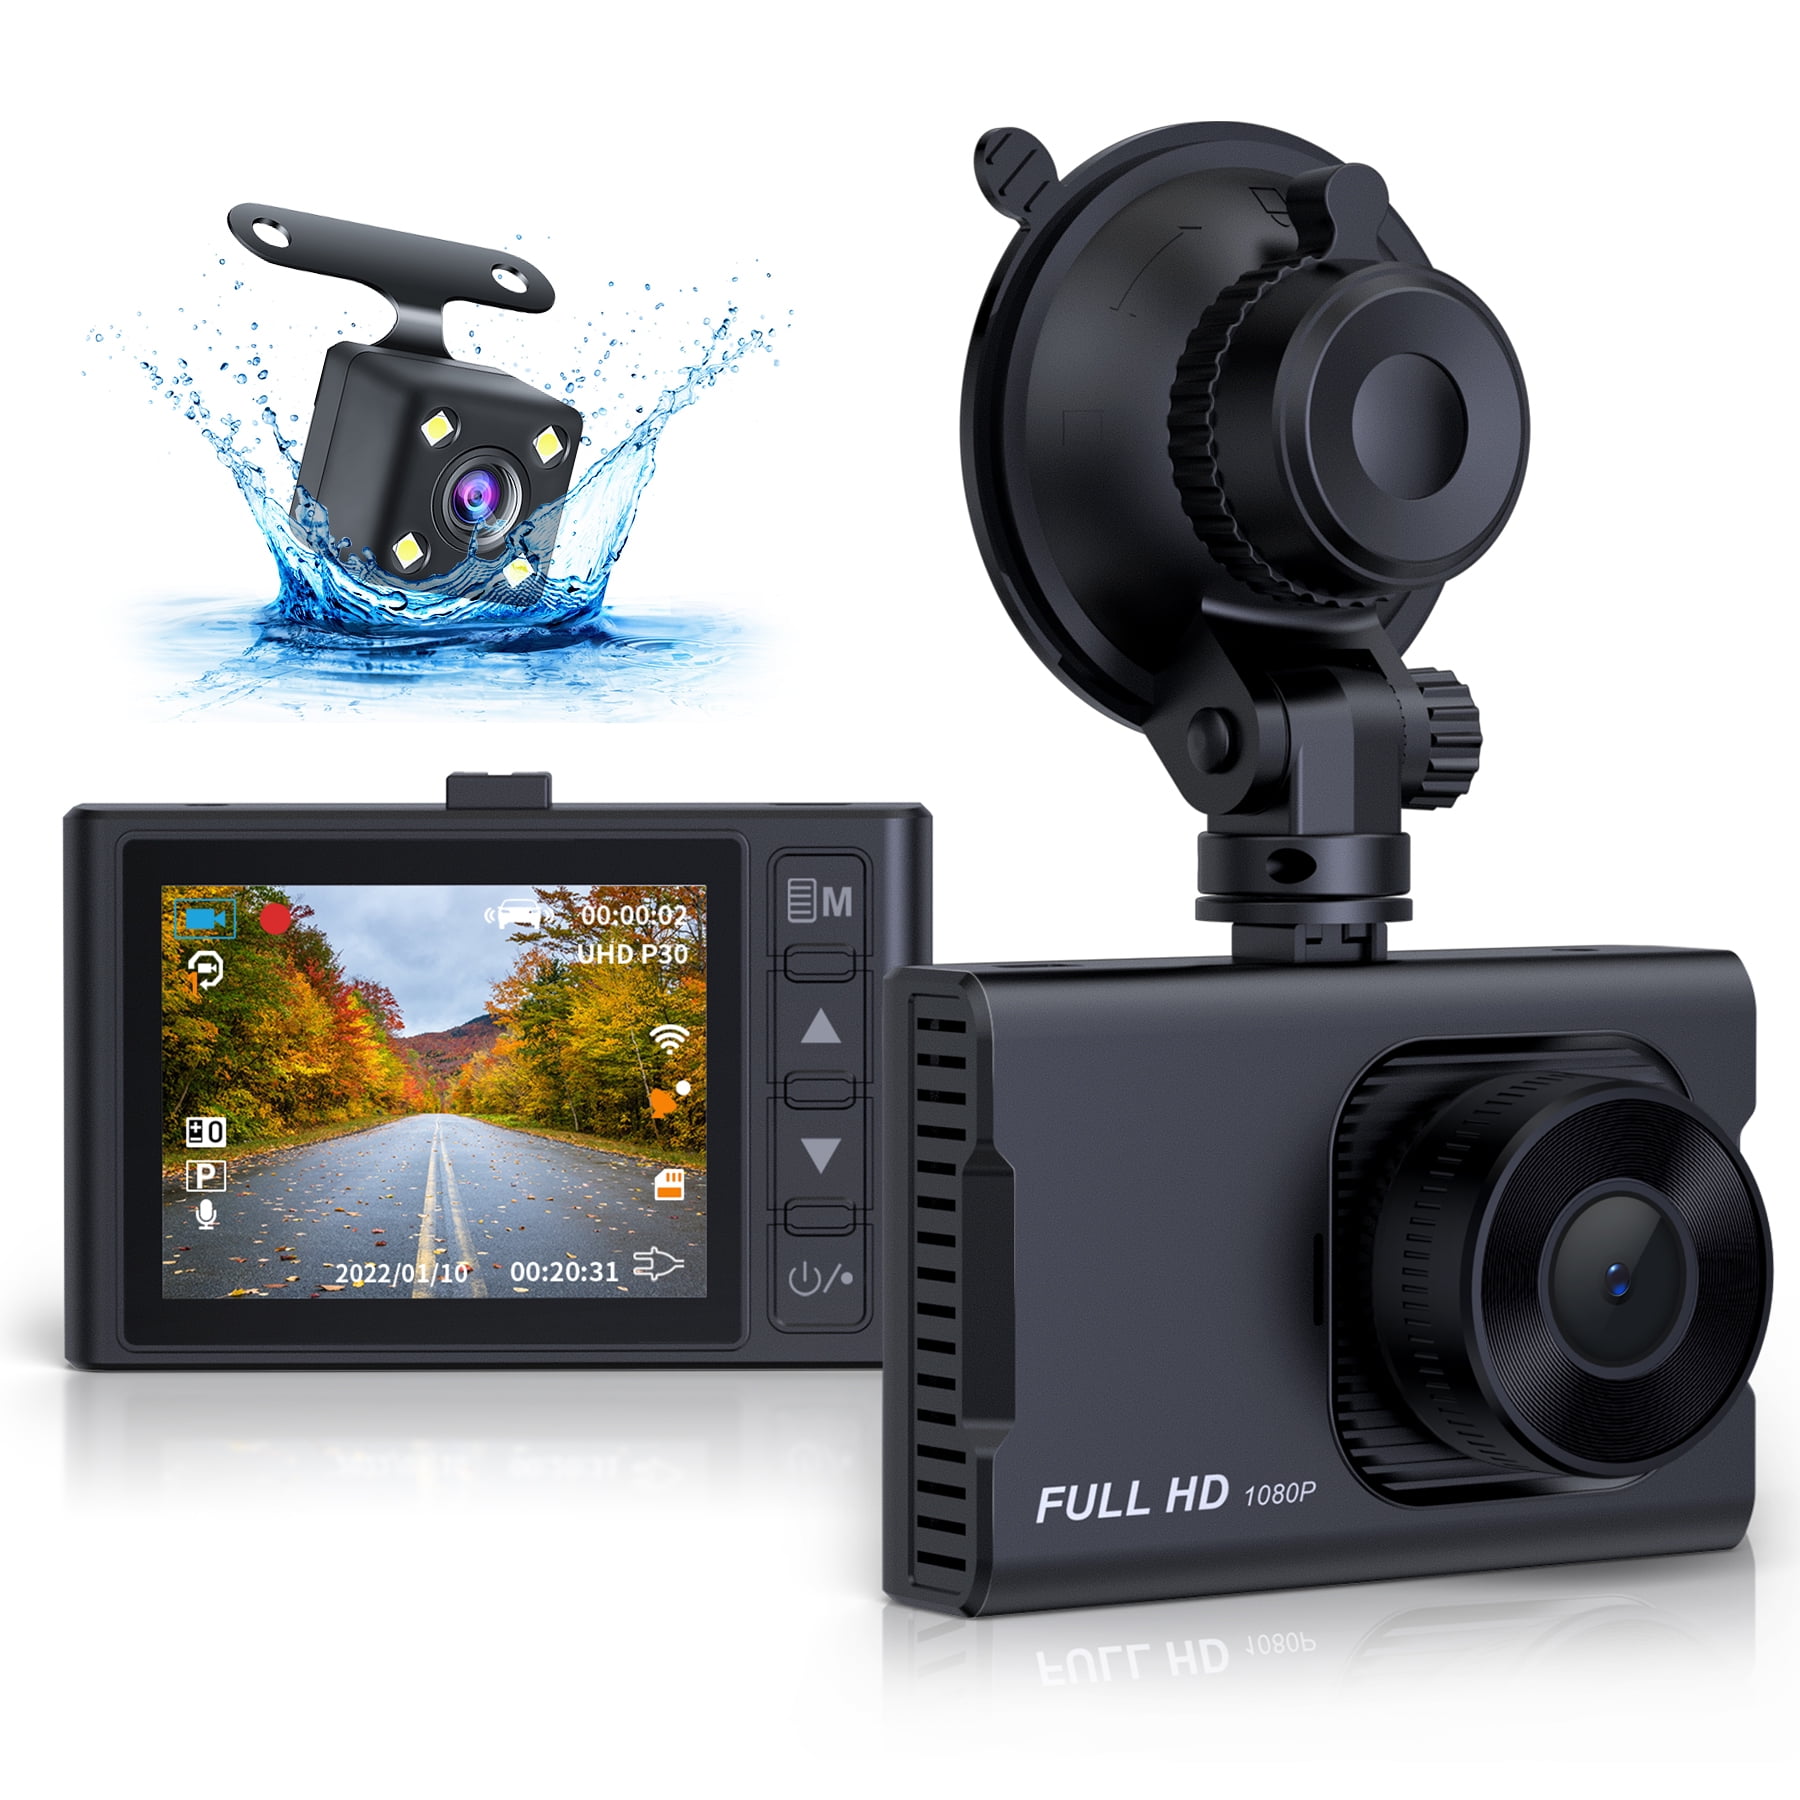 NEXPOW Dash Cam Front and 1080P Full HD Dash Camera, Dashcam with Night Vision, Car Camera with 3-inch LCD Display, Parking Mode, G-Sensor, Loop Recording, WDR - Walmart.com